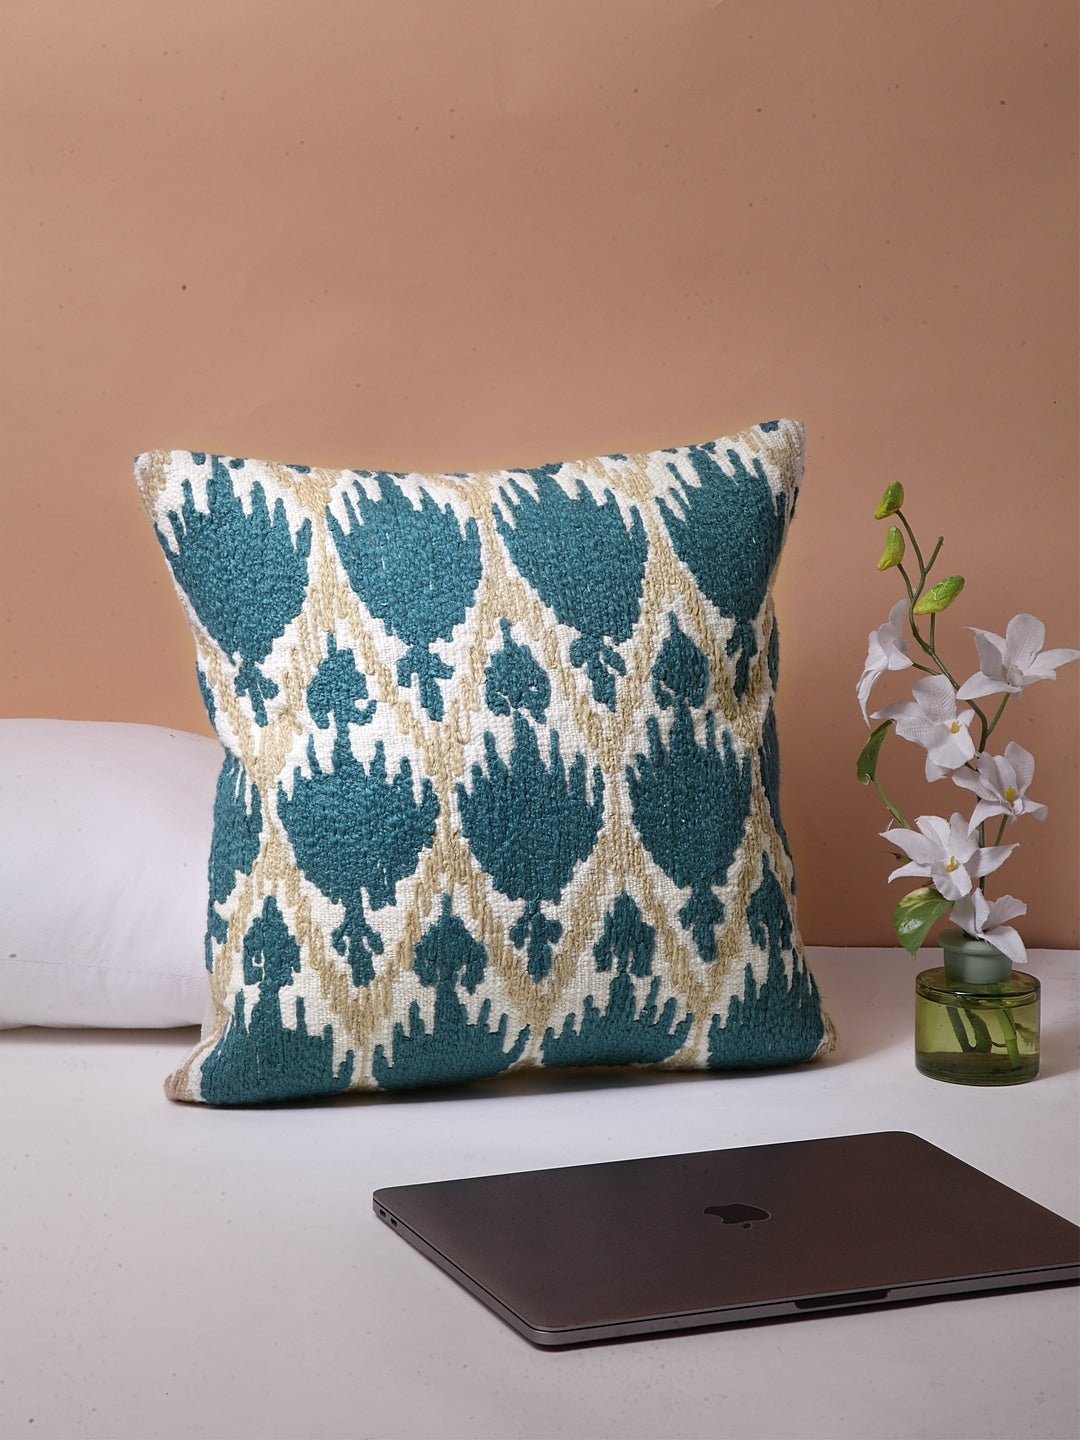 Blanc9 Ikat Embroidered Cushion Cover